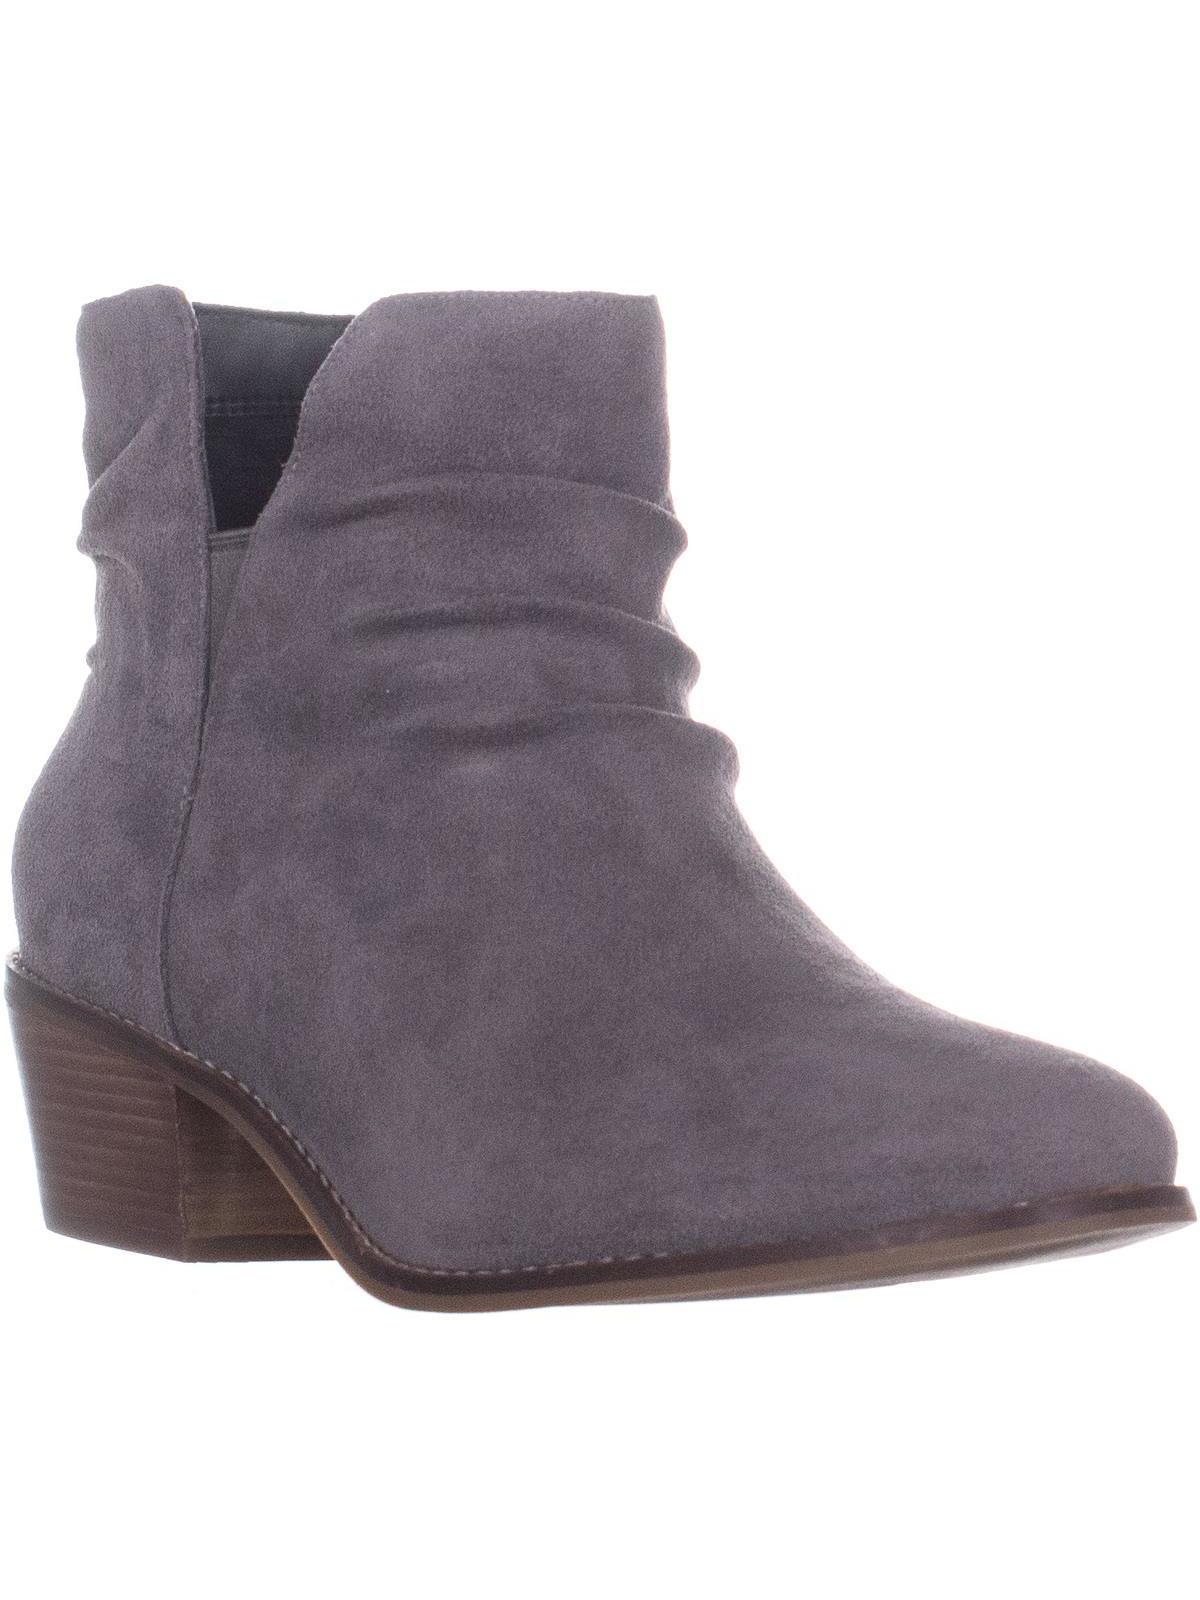 Cole Haan Alayna Slouch Ankle Boots, Stormcloud Suede SZ 9